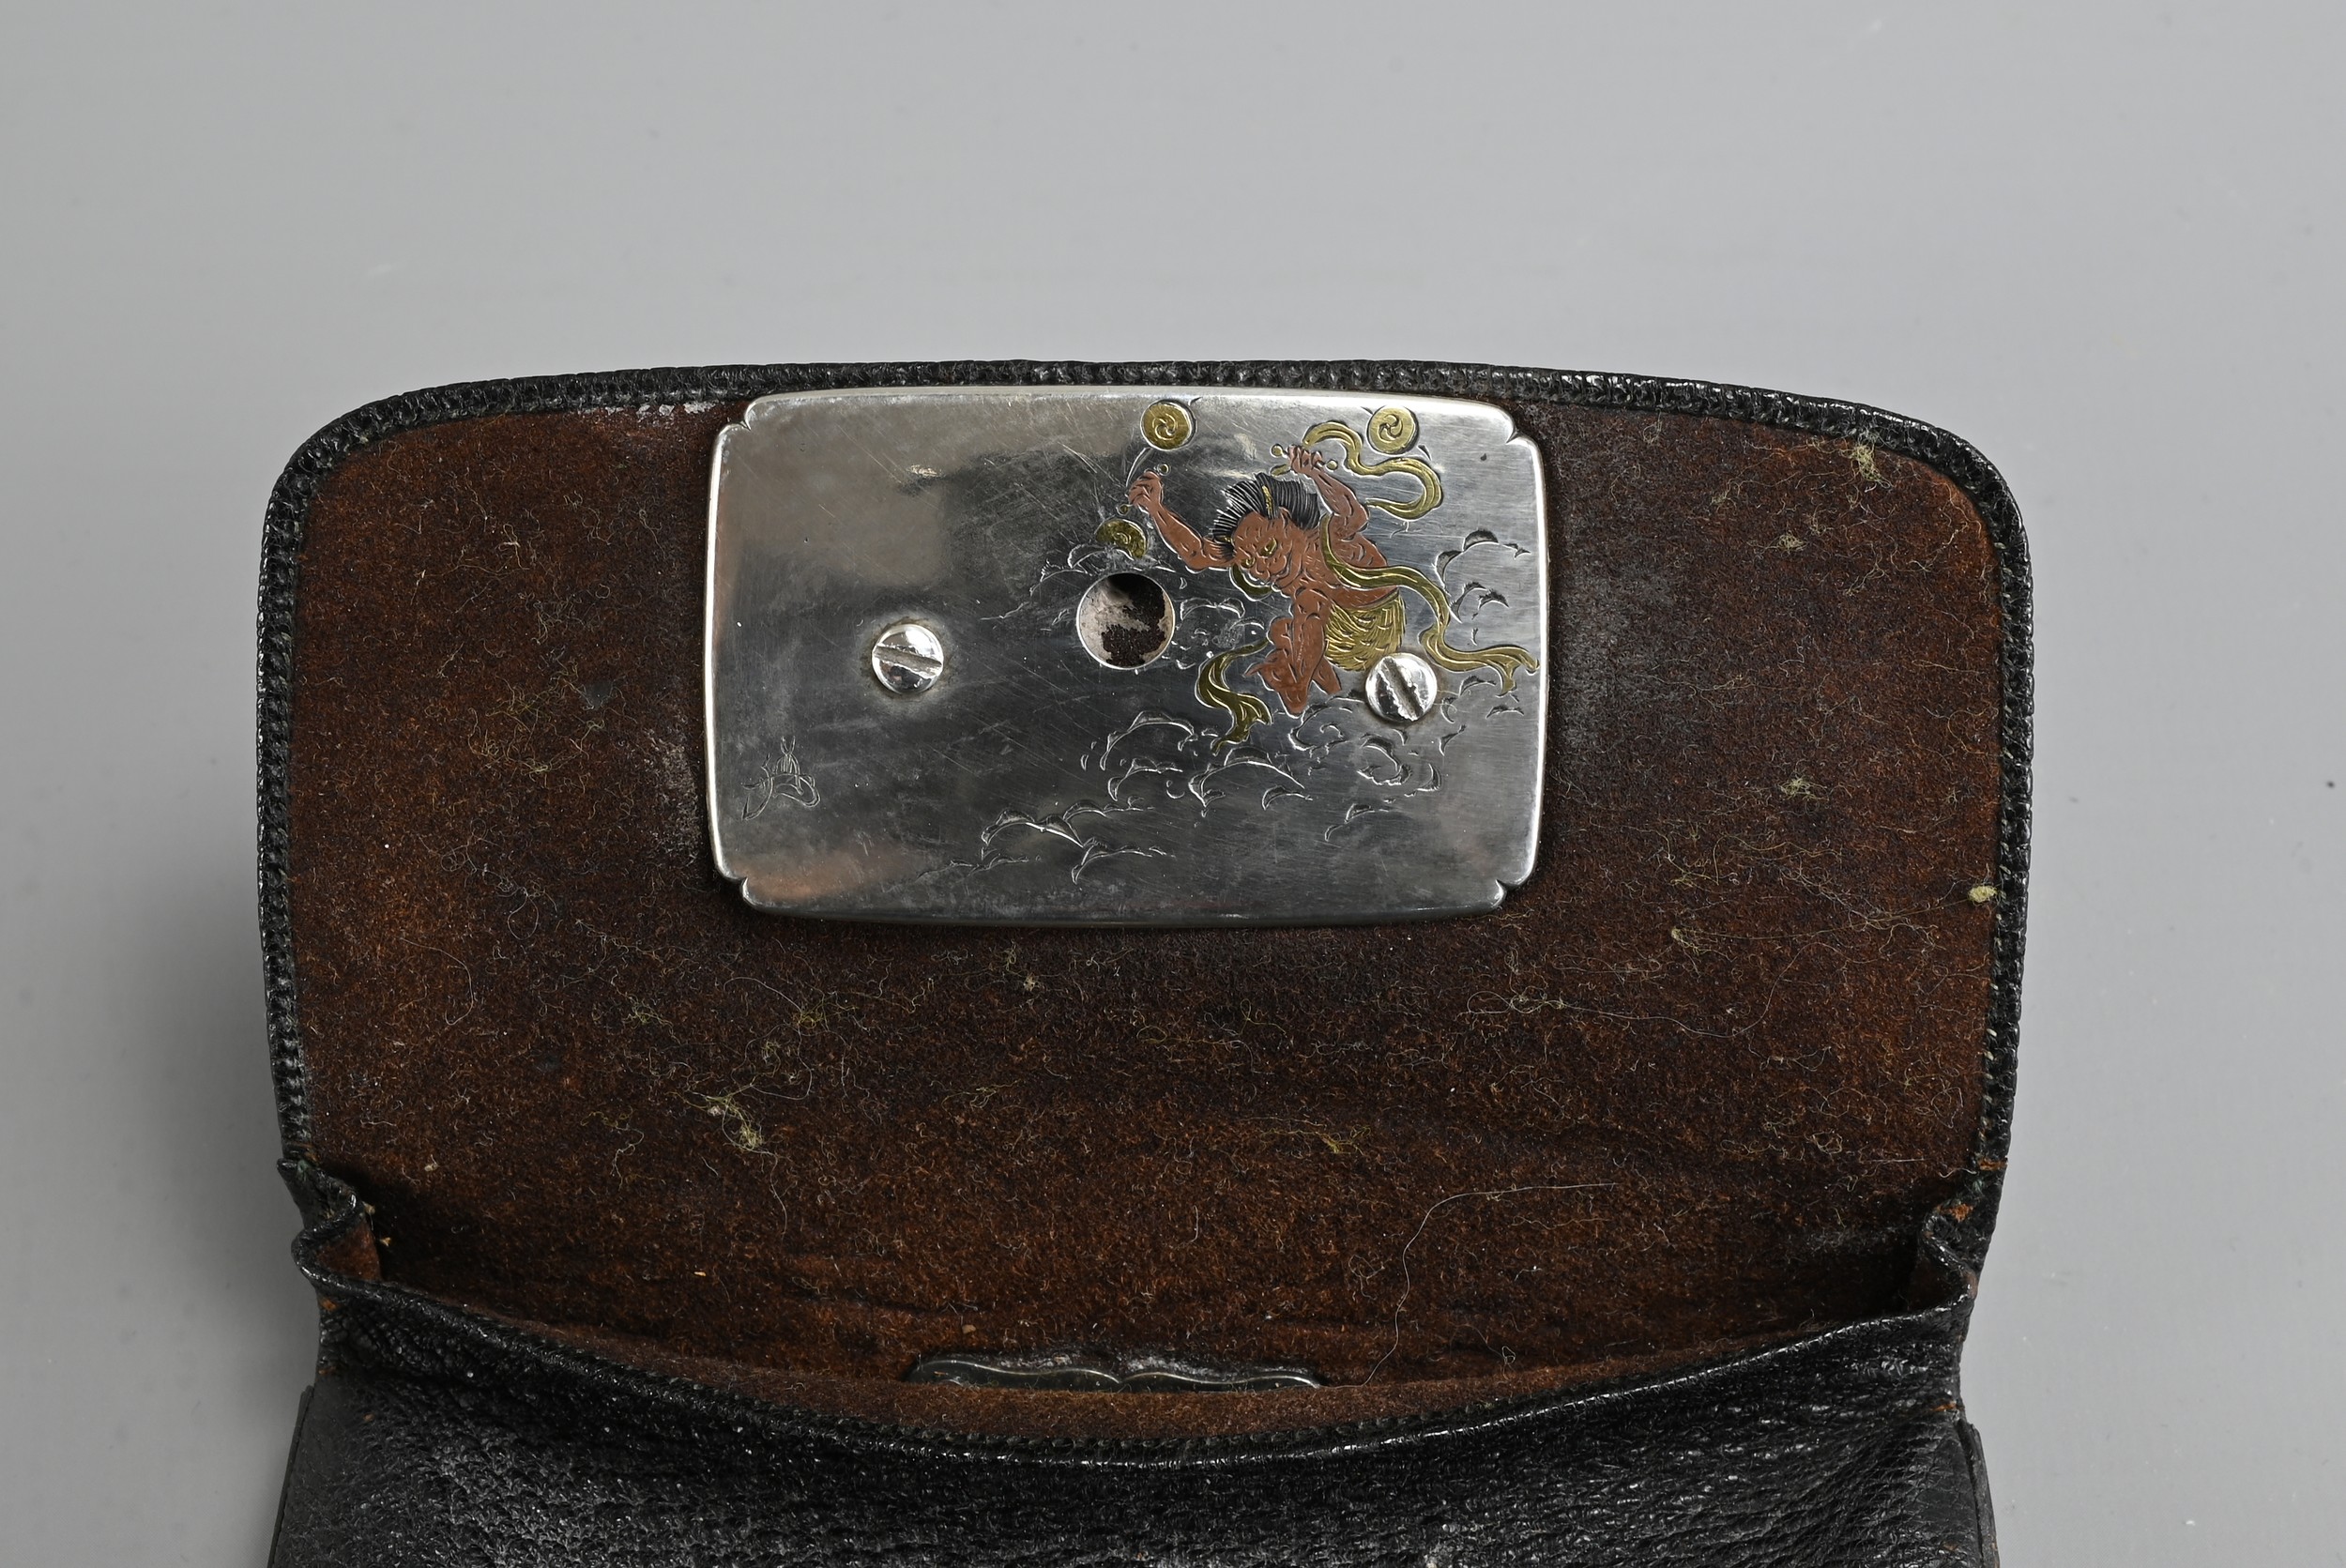 A JAPANESE MEIJI PERIOD (1868-1912) BLACK LEATHER COIN POUCH (FUKURO) WITH SILVER-COLOURED METAL - Image 6 of 6